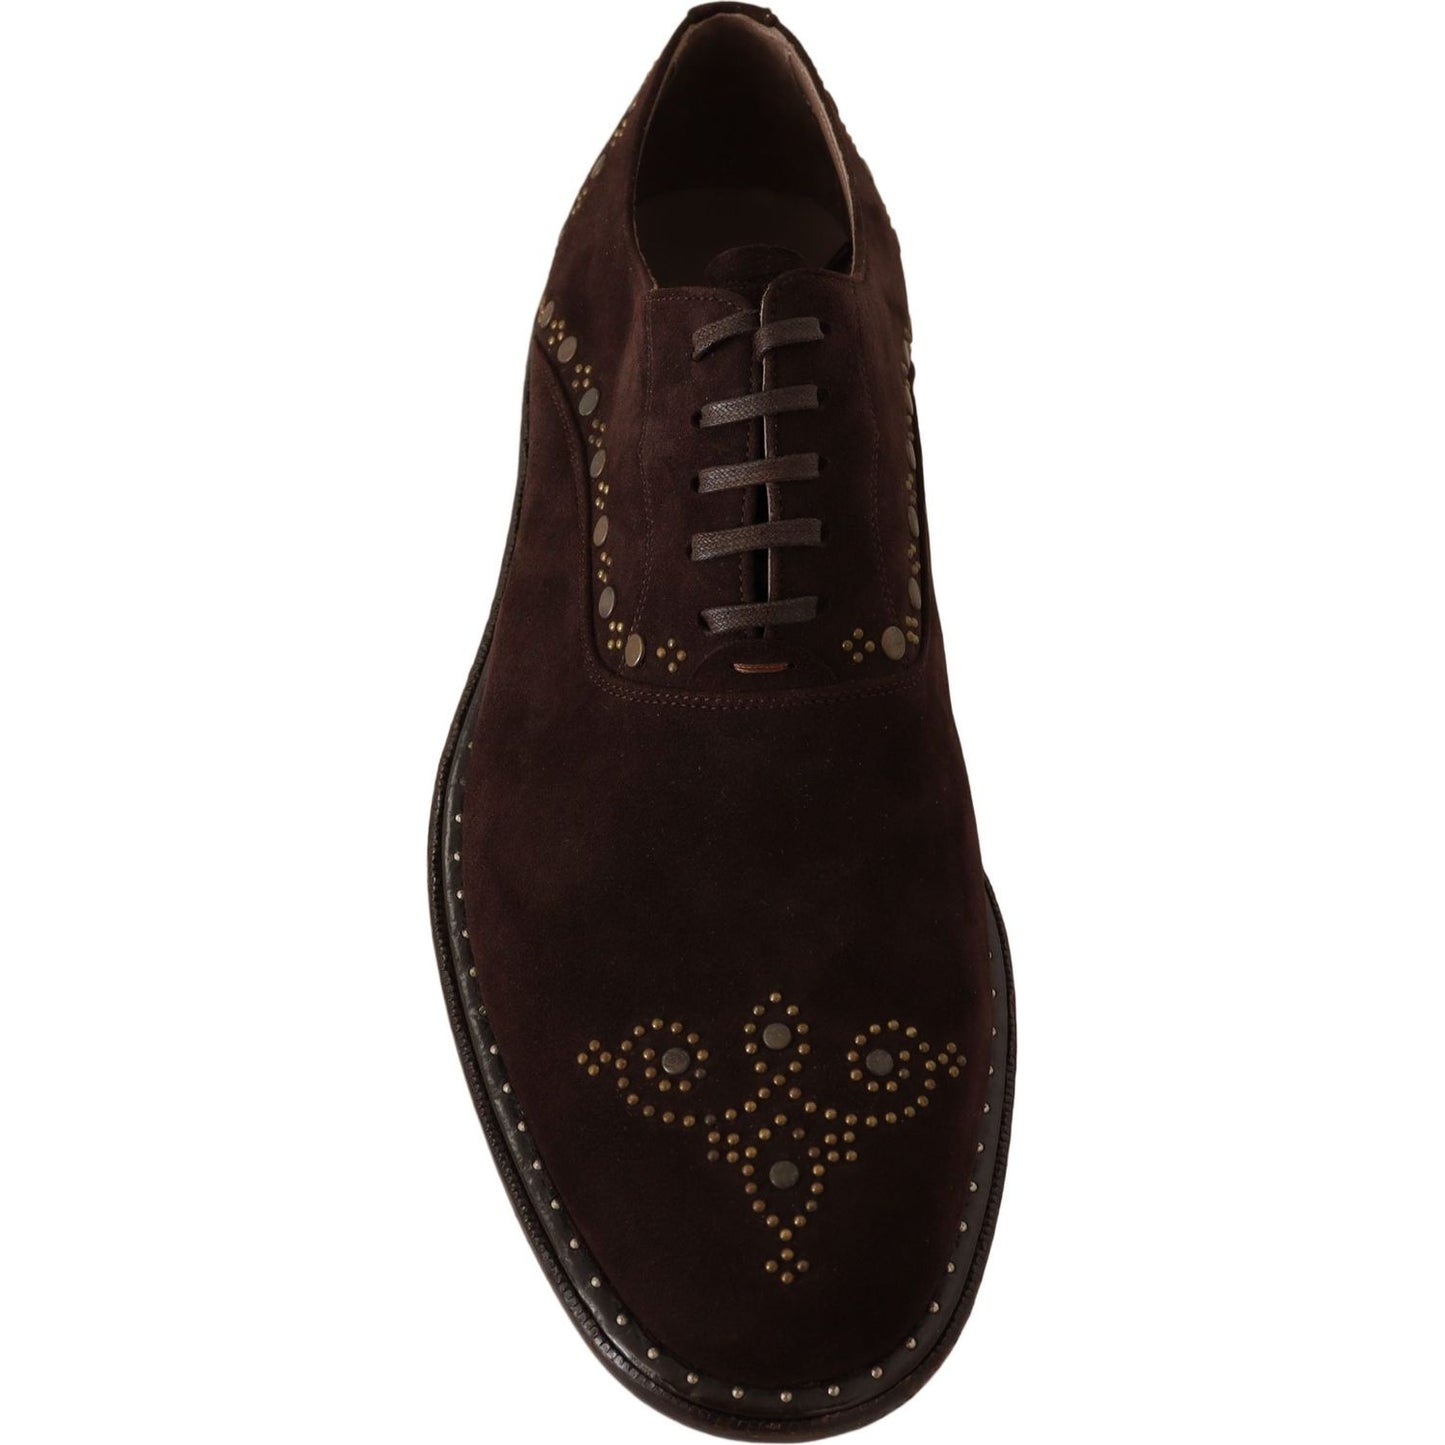 Dolce & Gabbana Elegant Brown Suede Studded Derby Shoes brown-suede-marsala-derby-studded-shoes Dress Shoes IMG_0017-scaled-6a168034-d44.jpg